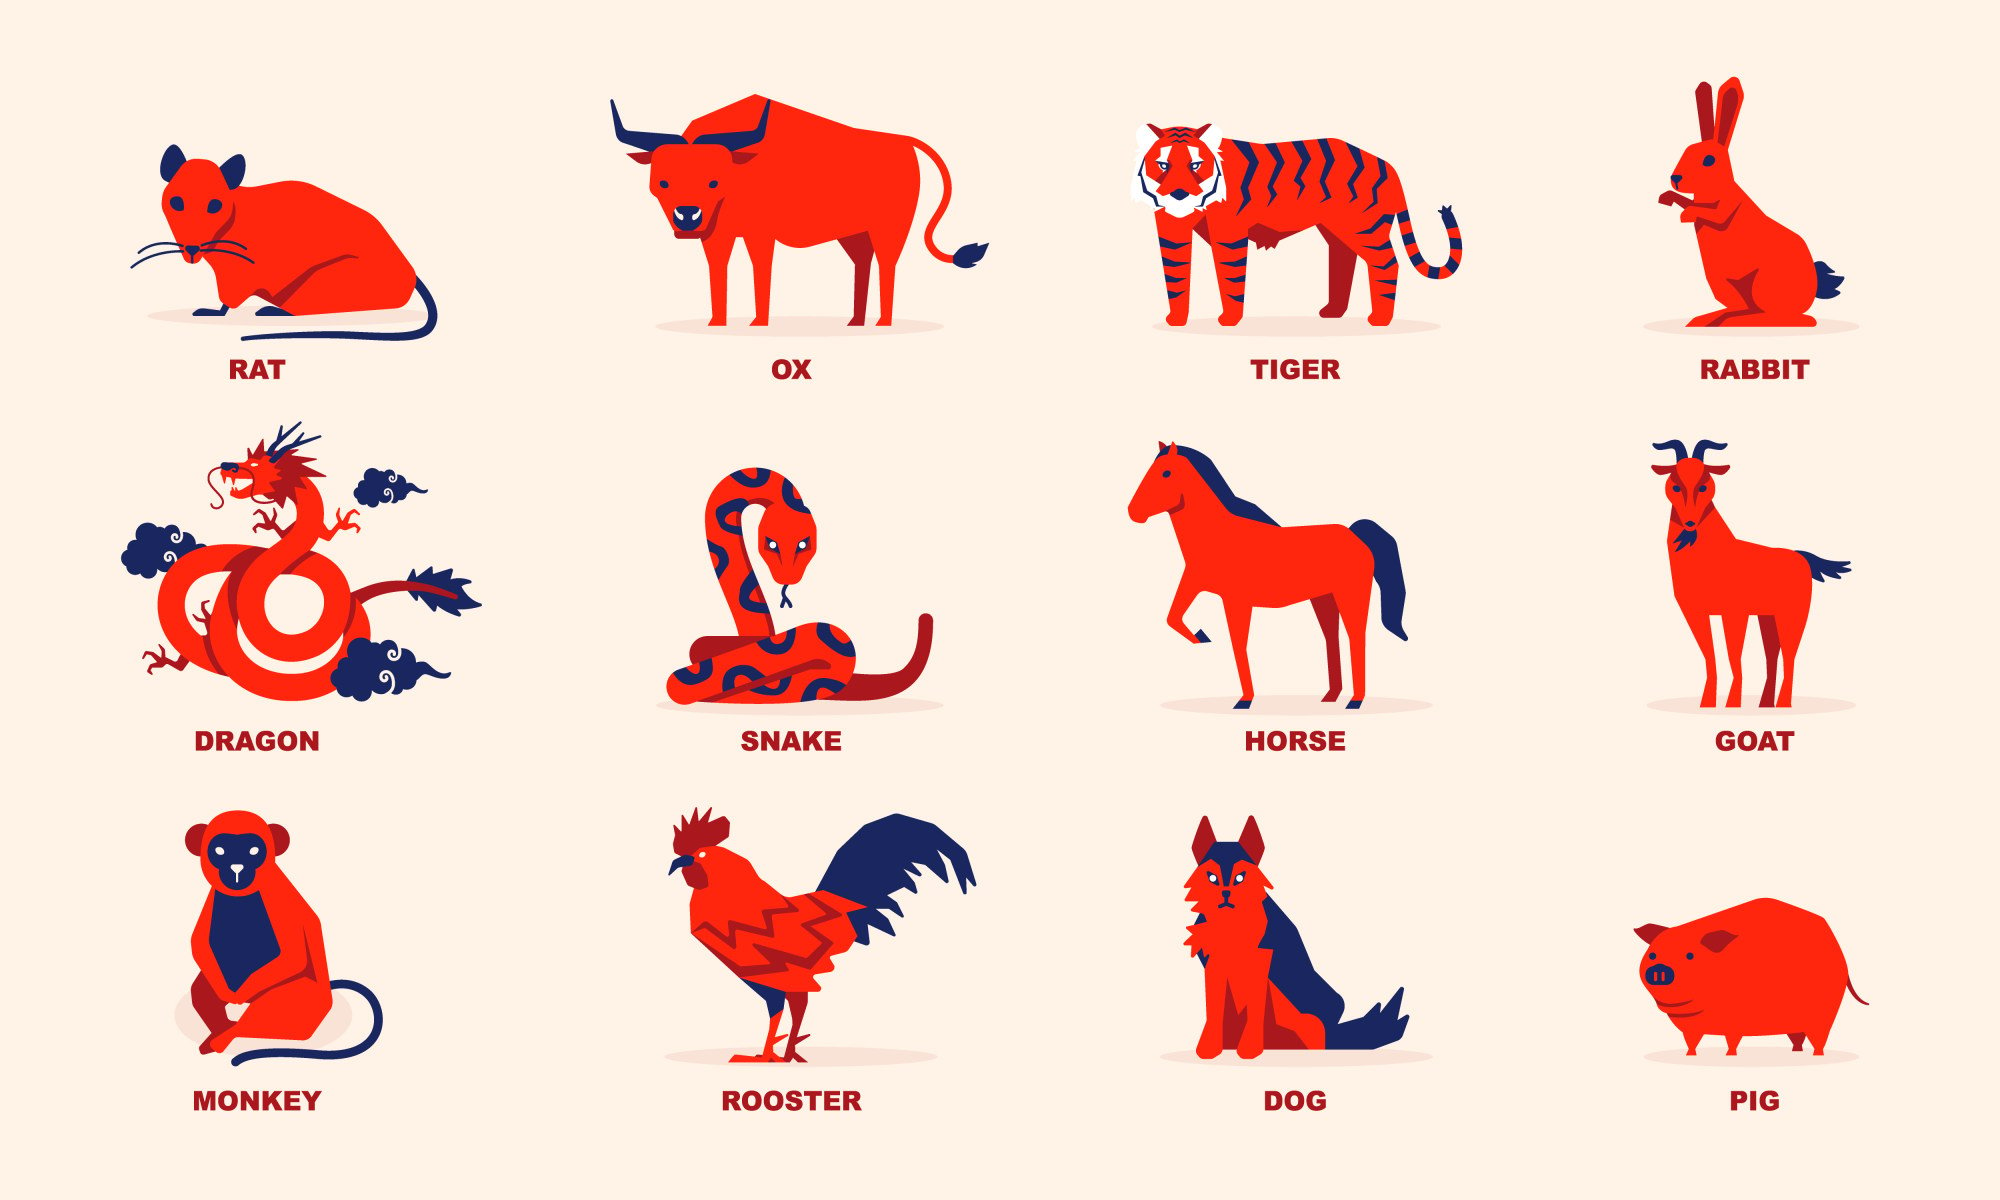 What Chinese animal am I? Characteristics of the Dragon, Snake, Horse